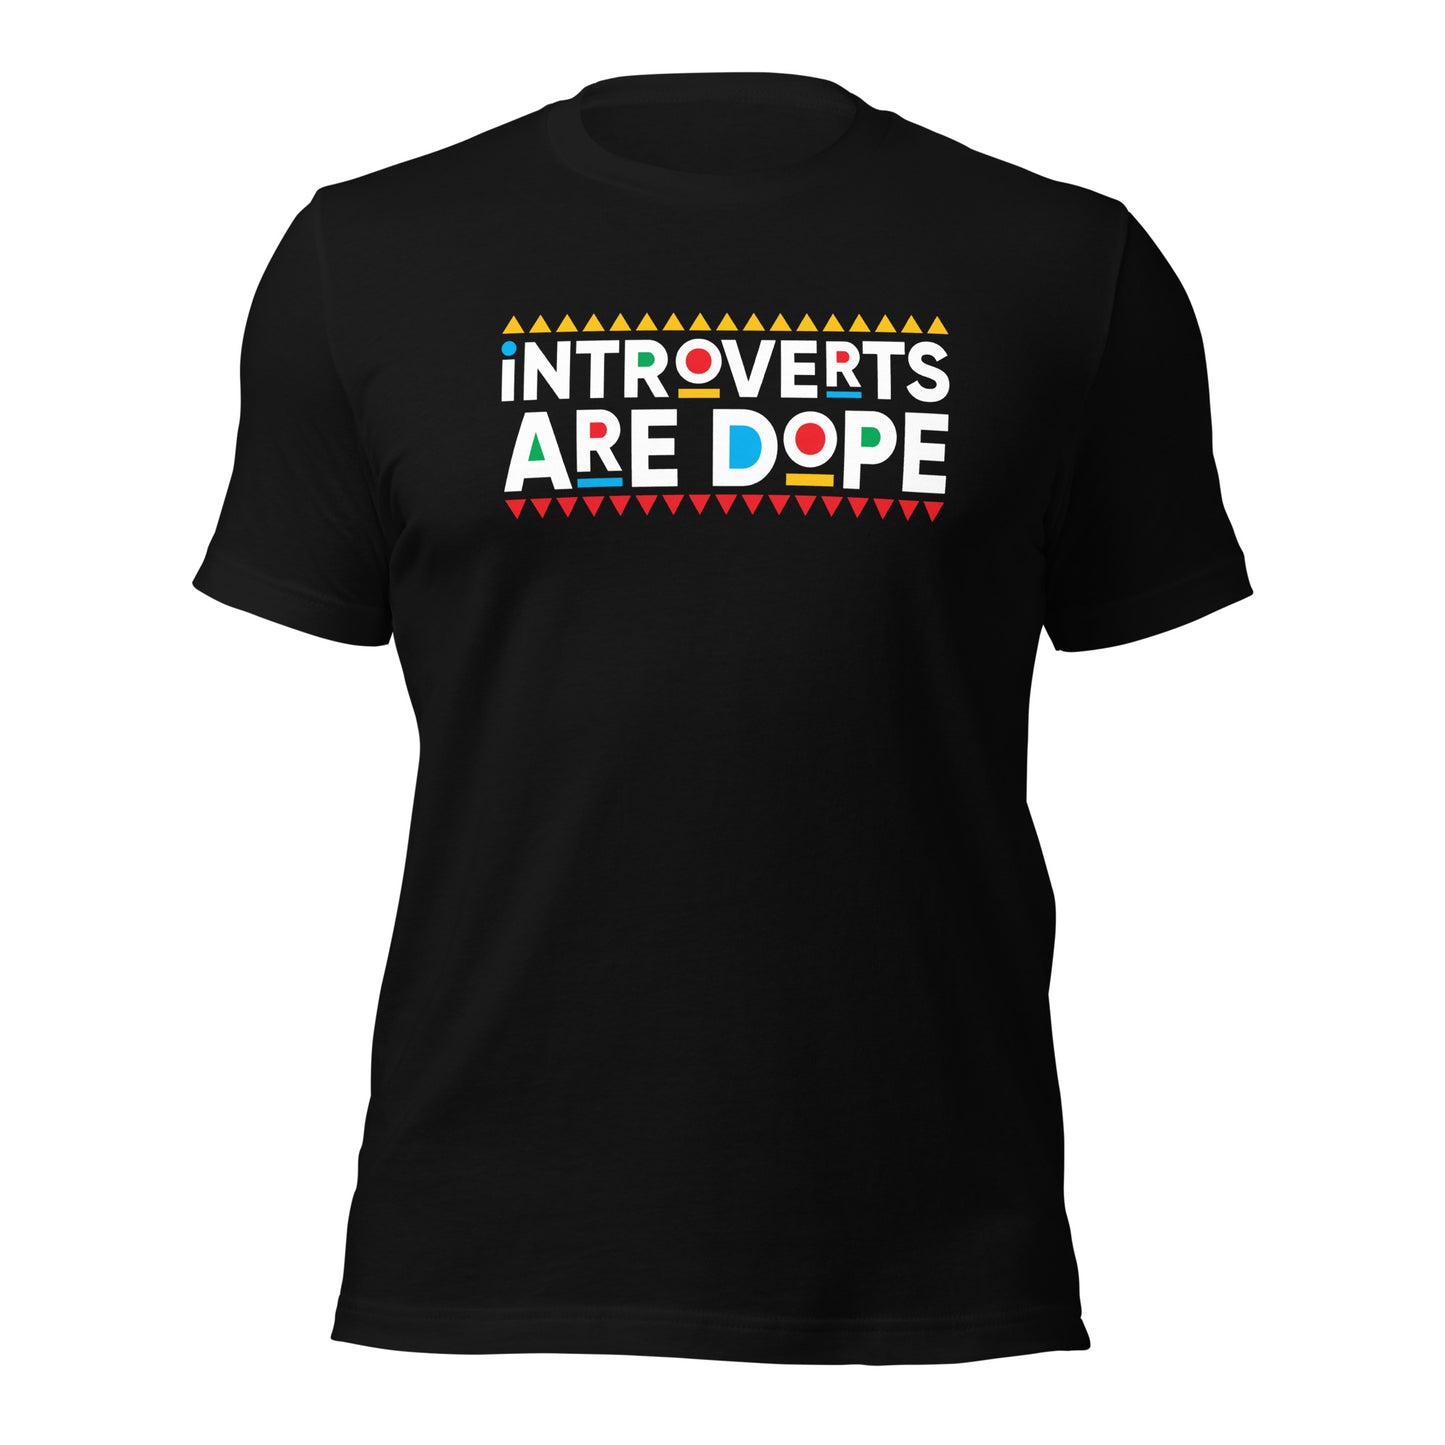 Introverts are dope t-shirt